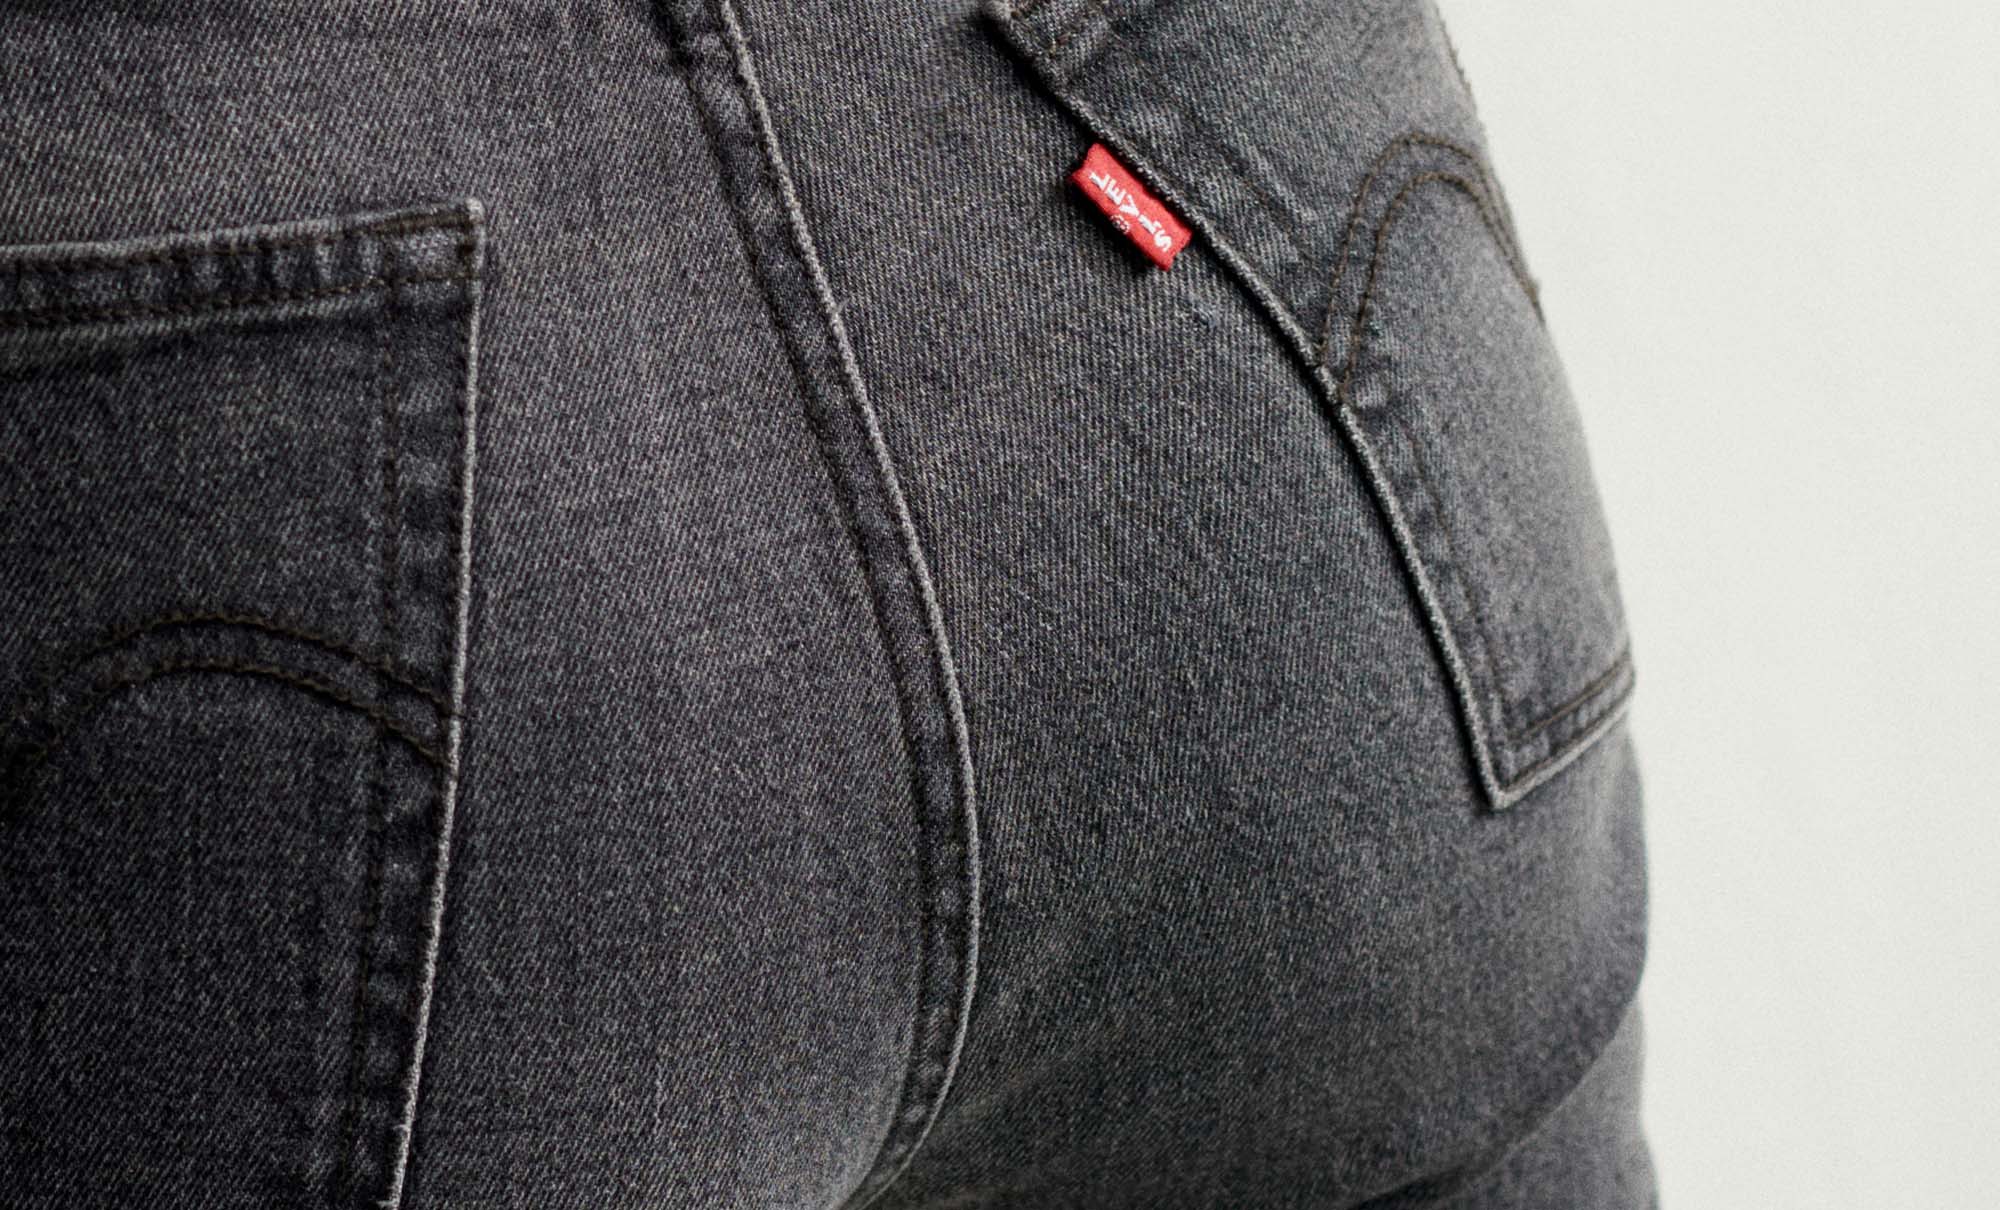 Levi's CEO Says Our Lockdown Weight Changes Are Boosting Sales